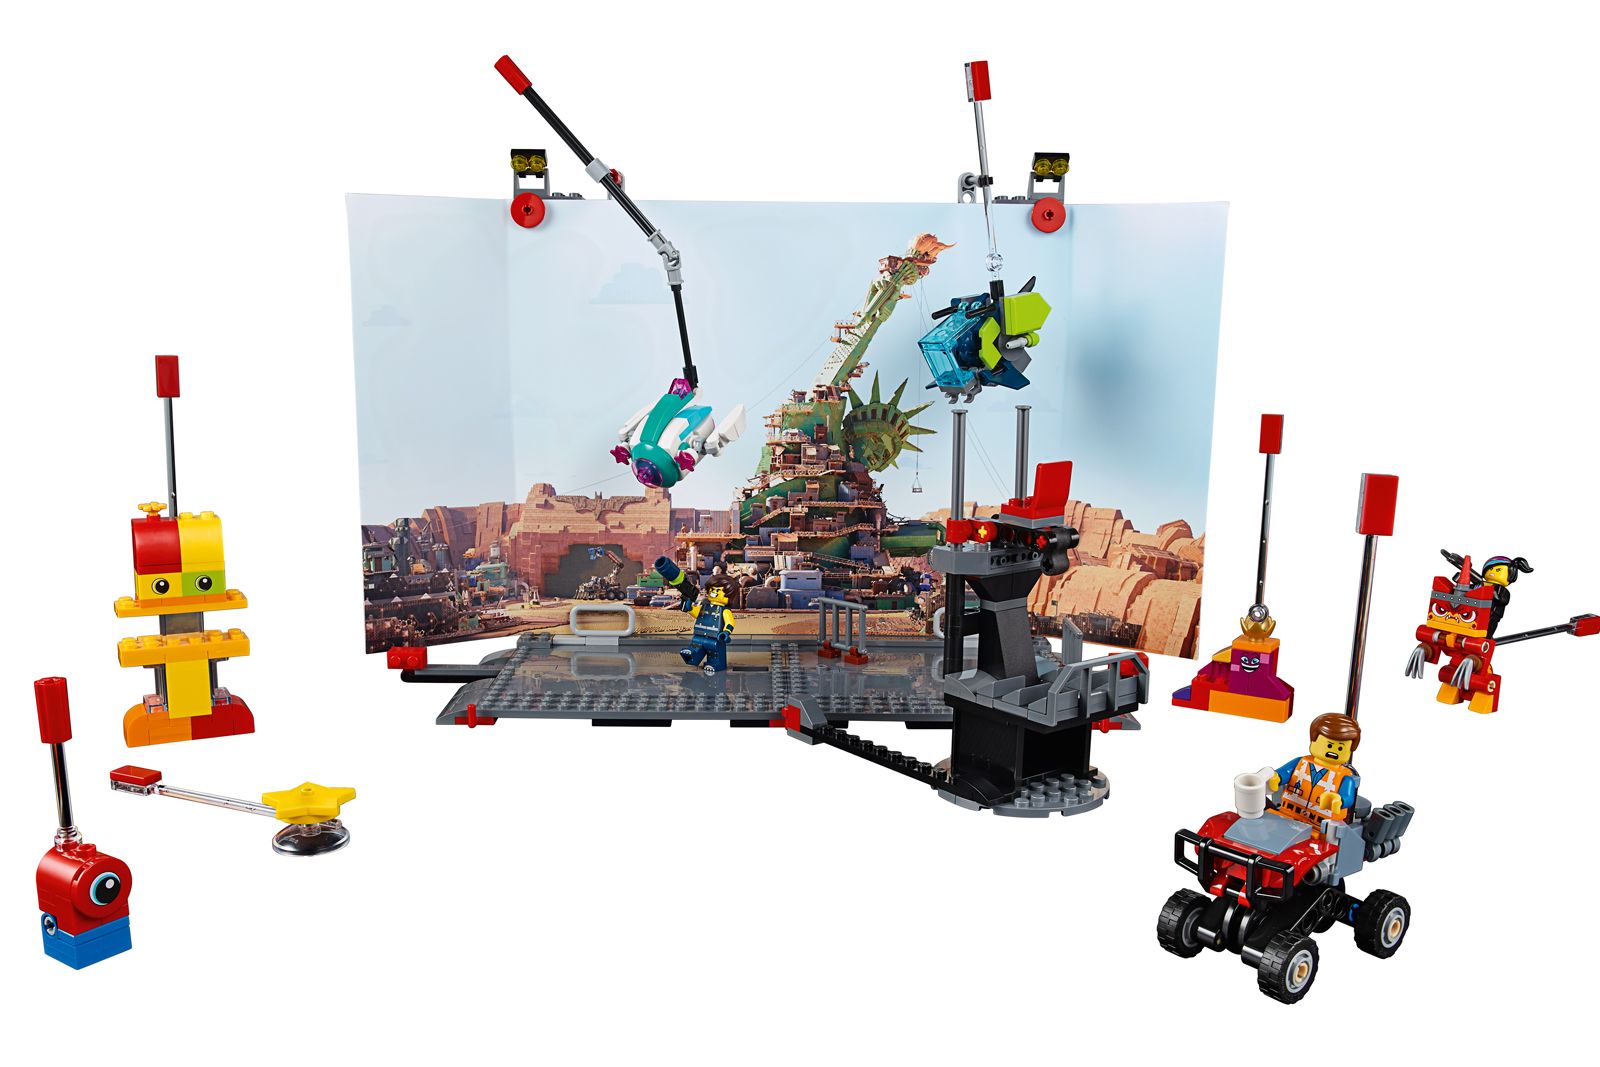 21 Lego sets from The Lego Movie 2 The Second Part - every set covered image 13